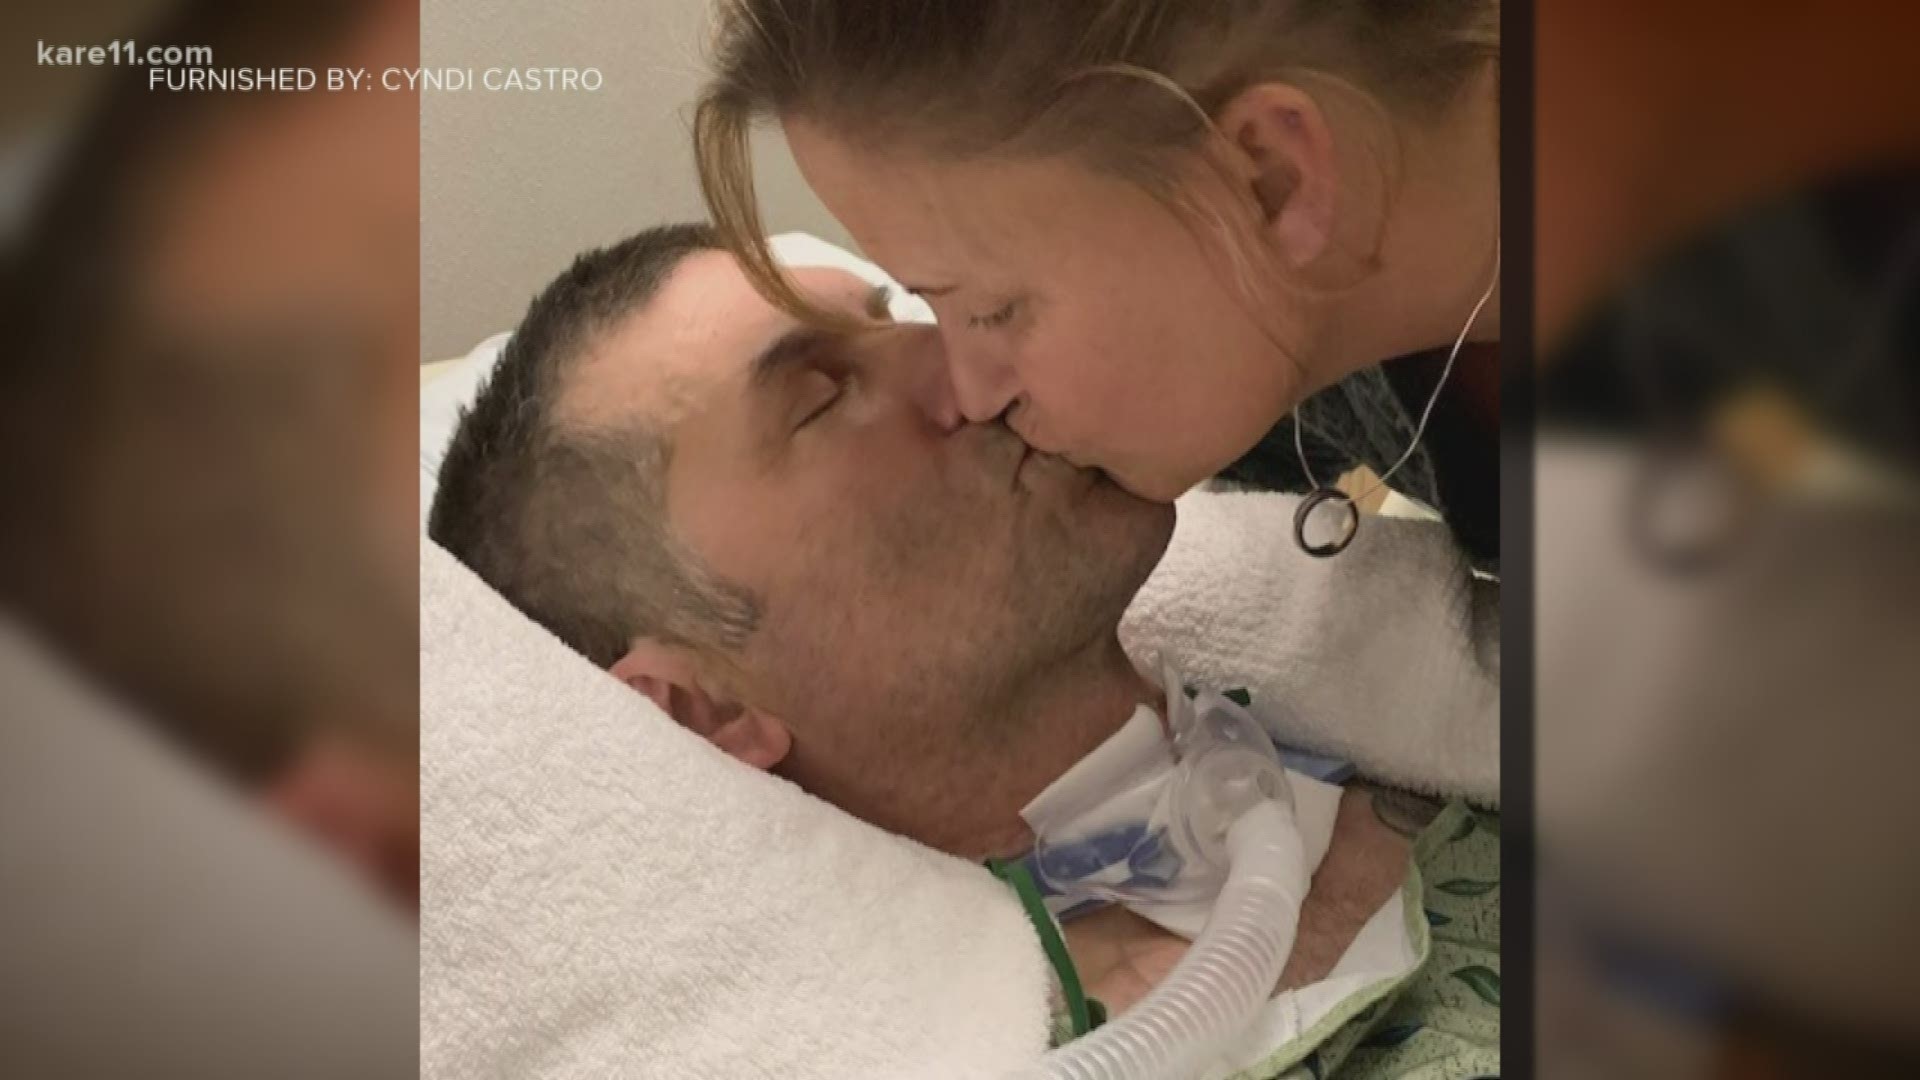 Jeff Houghtaling spent seven weeks in a coma with a traumatic brain injury.